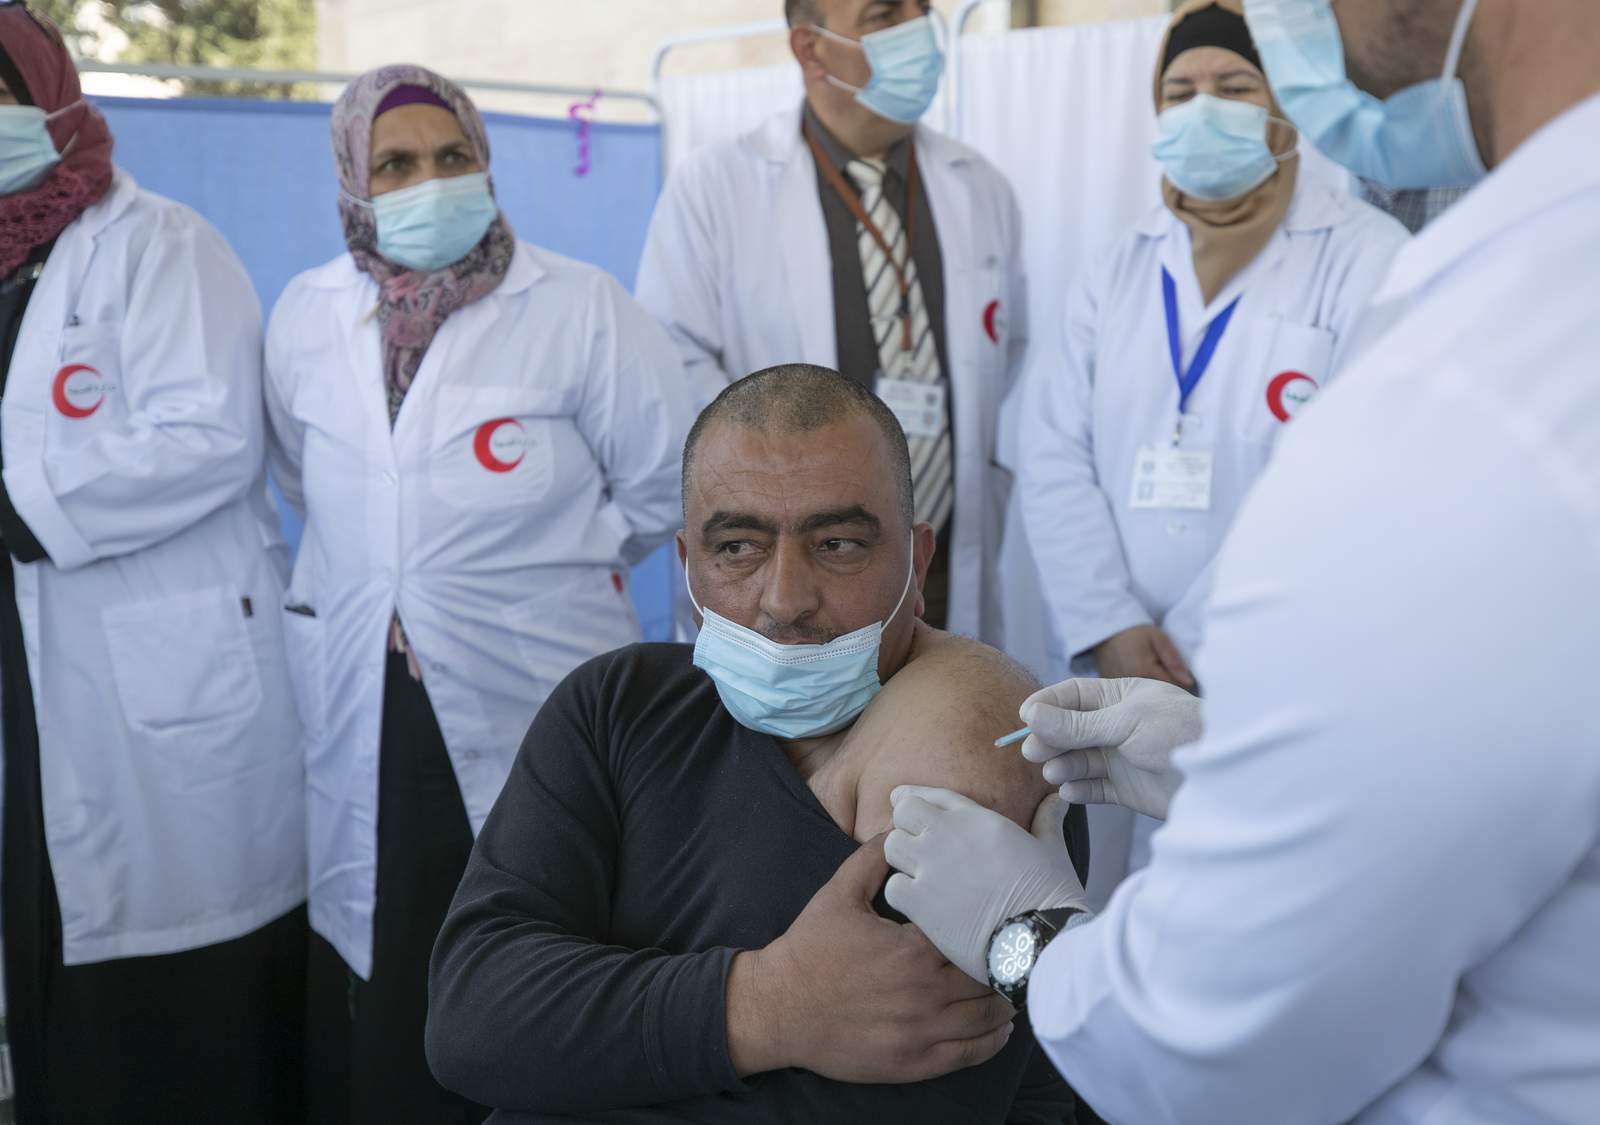 Palestinian Authority faces criticism over vaccine rollout